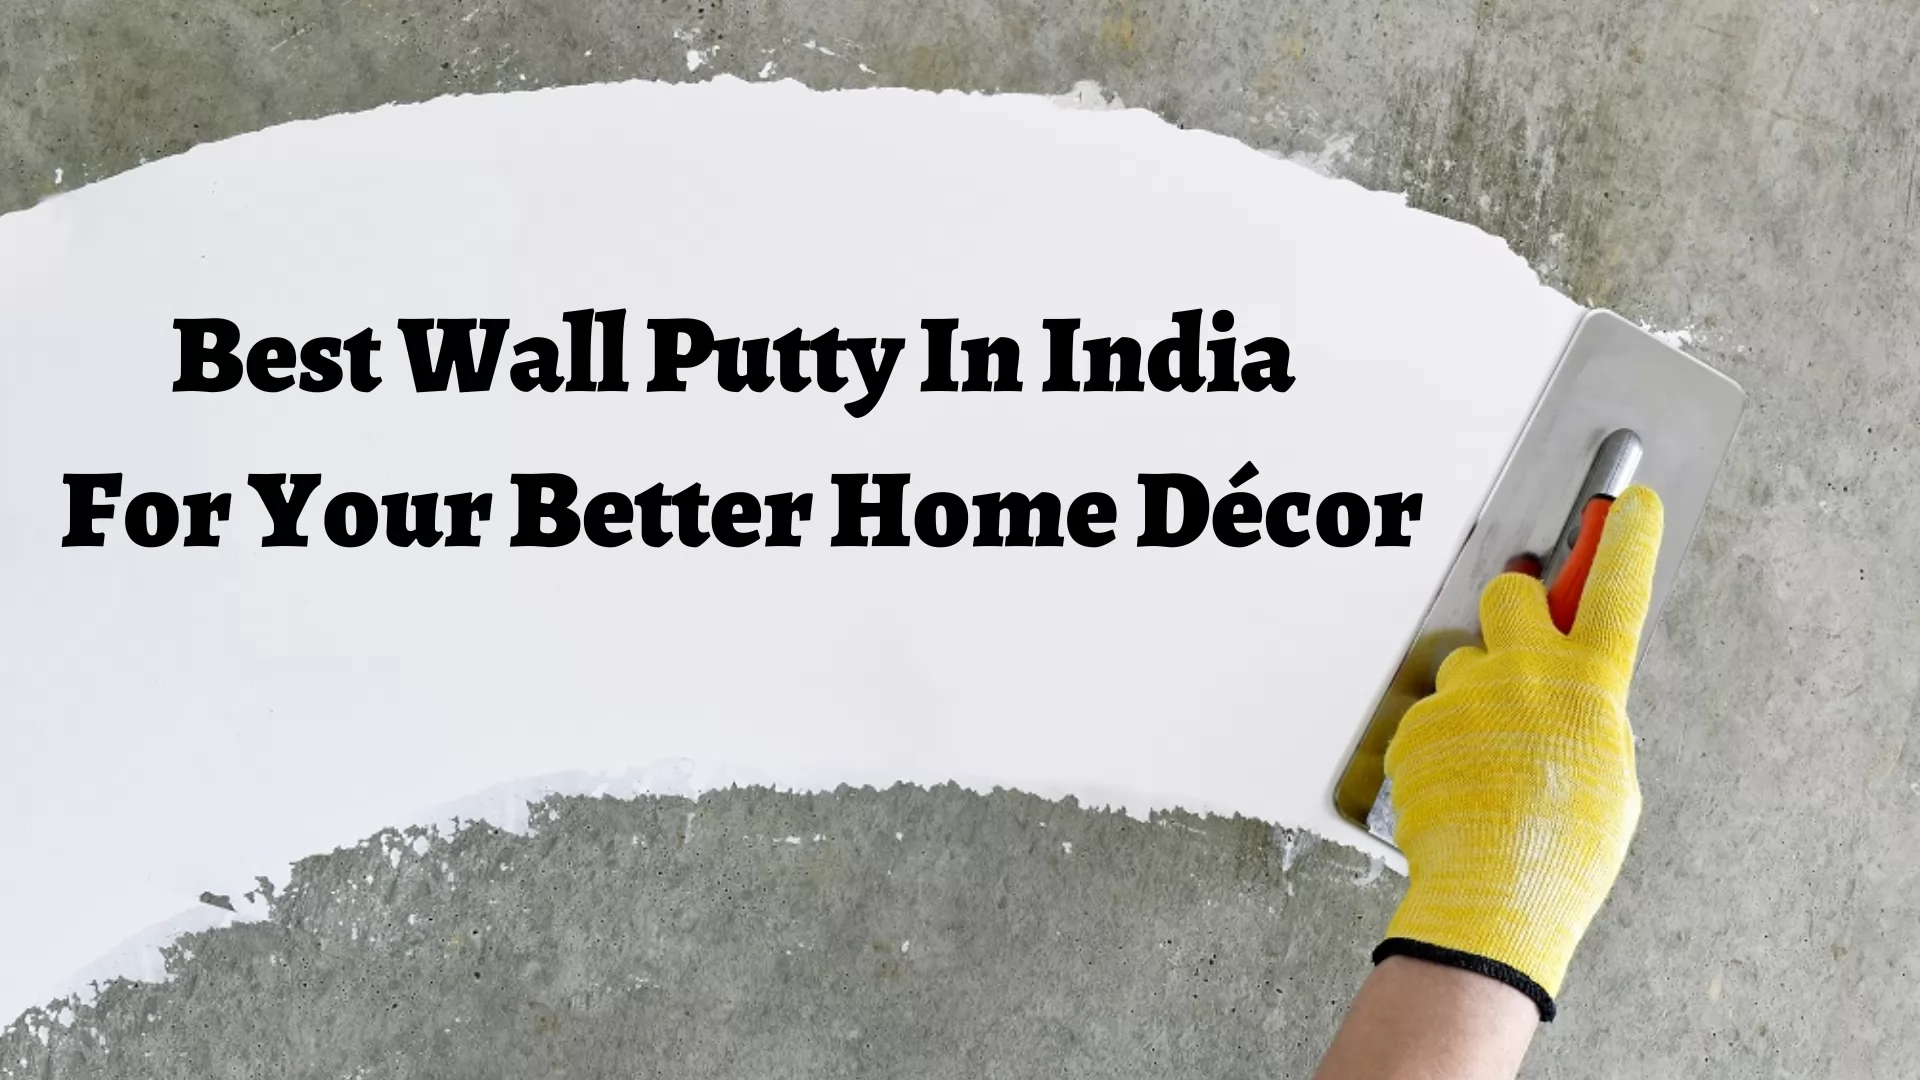 Best Wall Putty In India For Your Better Home Decor